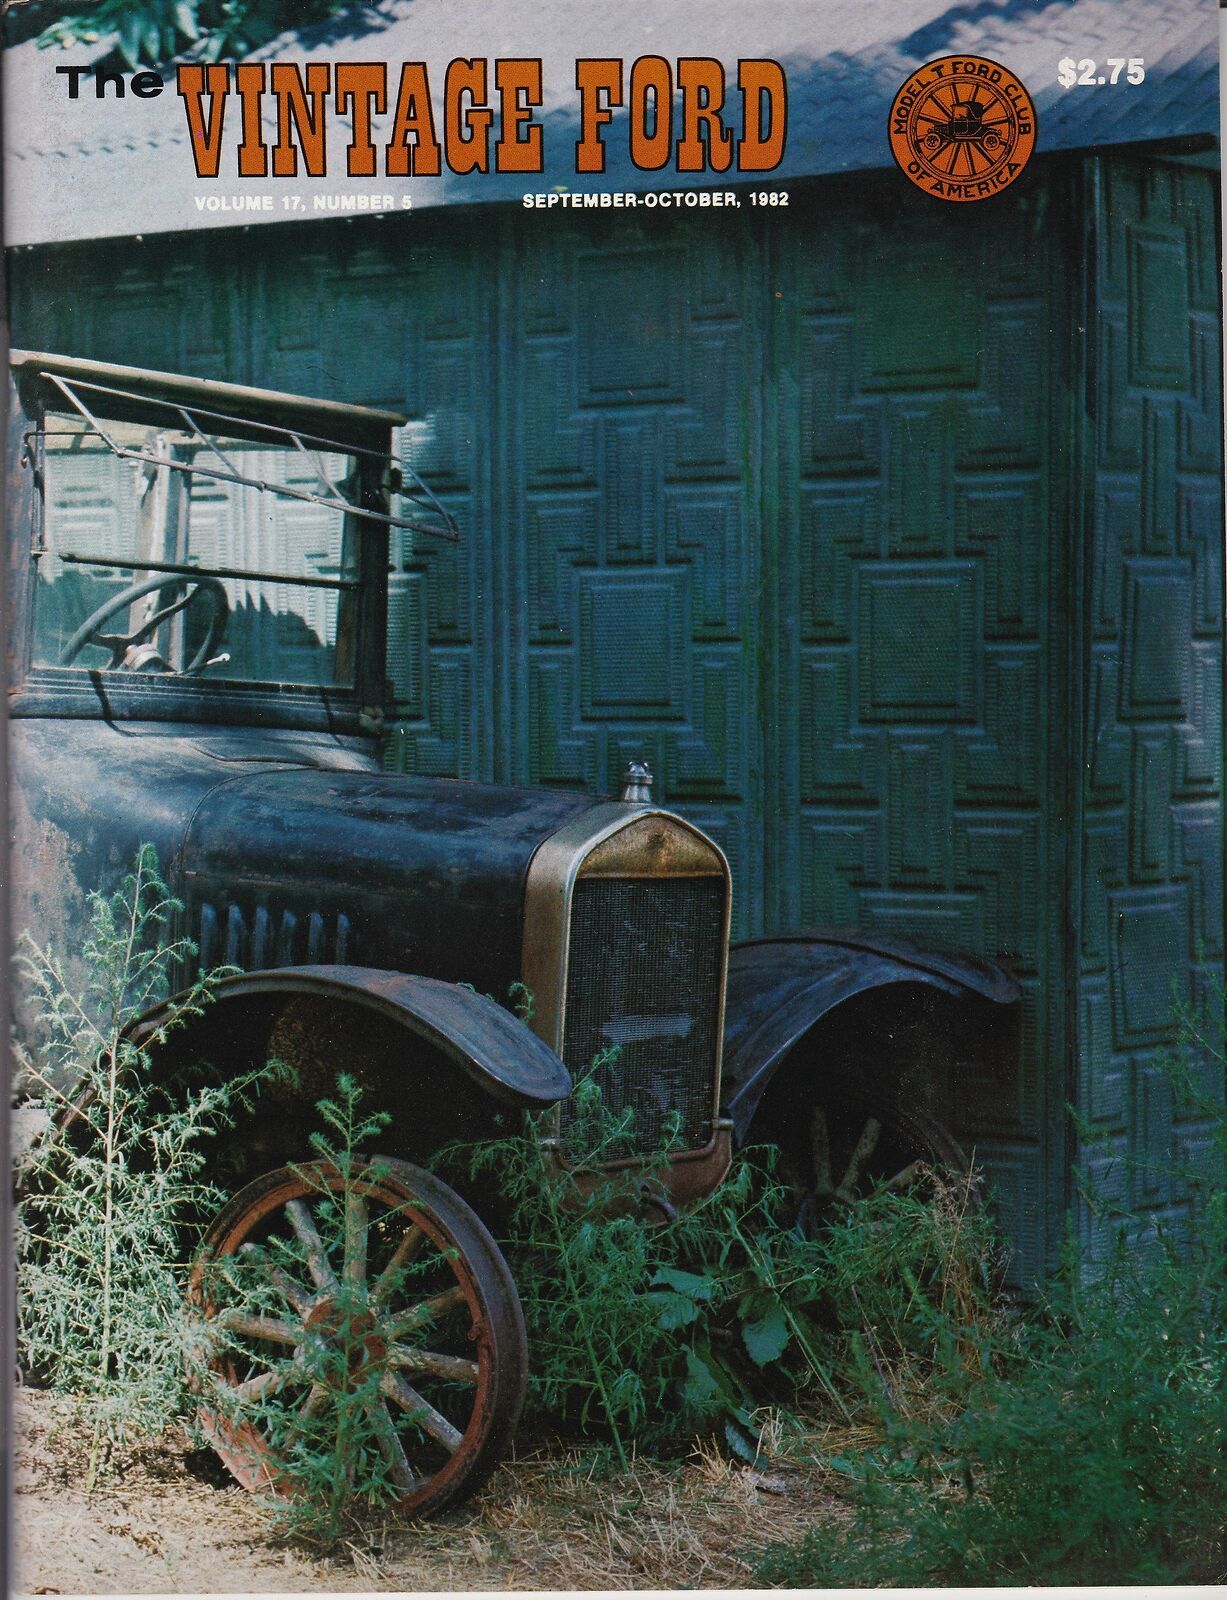 1922 TOURING - THE VINTAGE FORD MAGAZINE 1982 -  MODEL T FORD CLUB OF AMERICA 